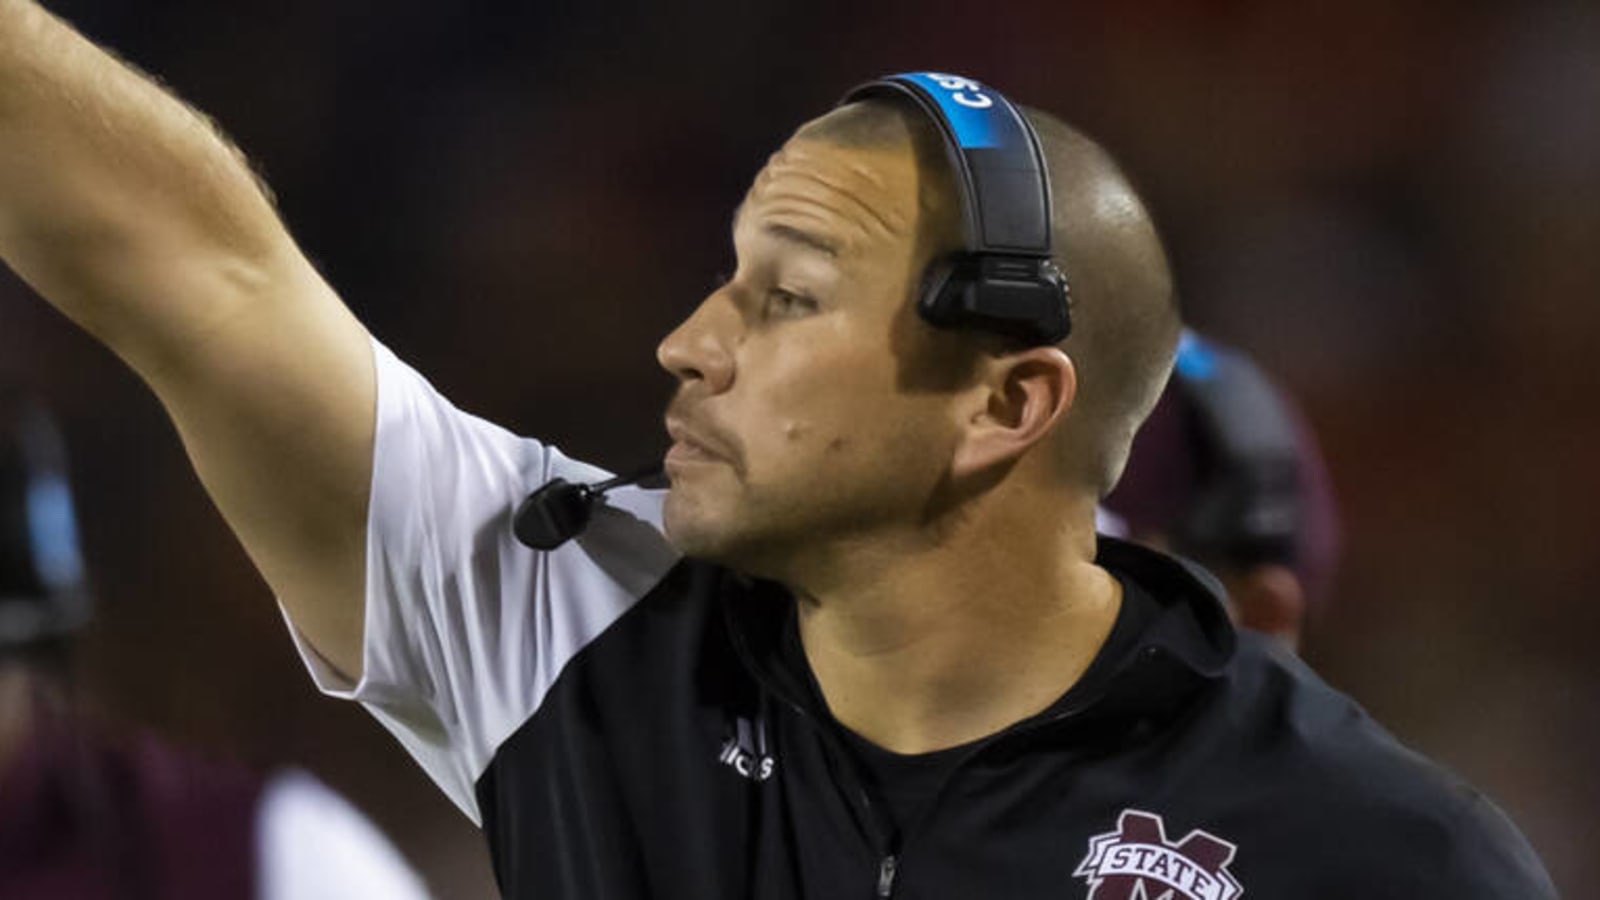 Mississippi State promotes Arnett to head coach to build on Leach's foundation